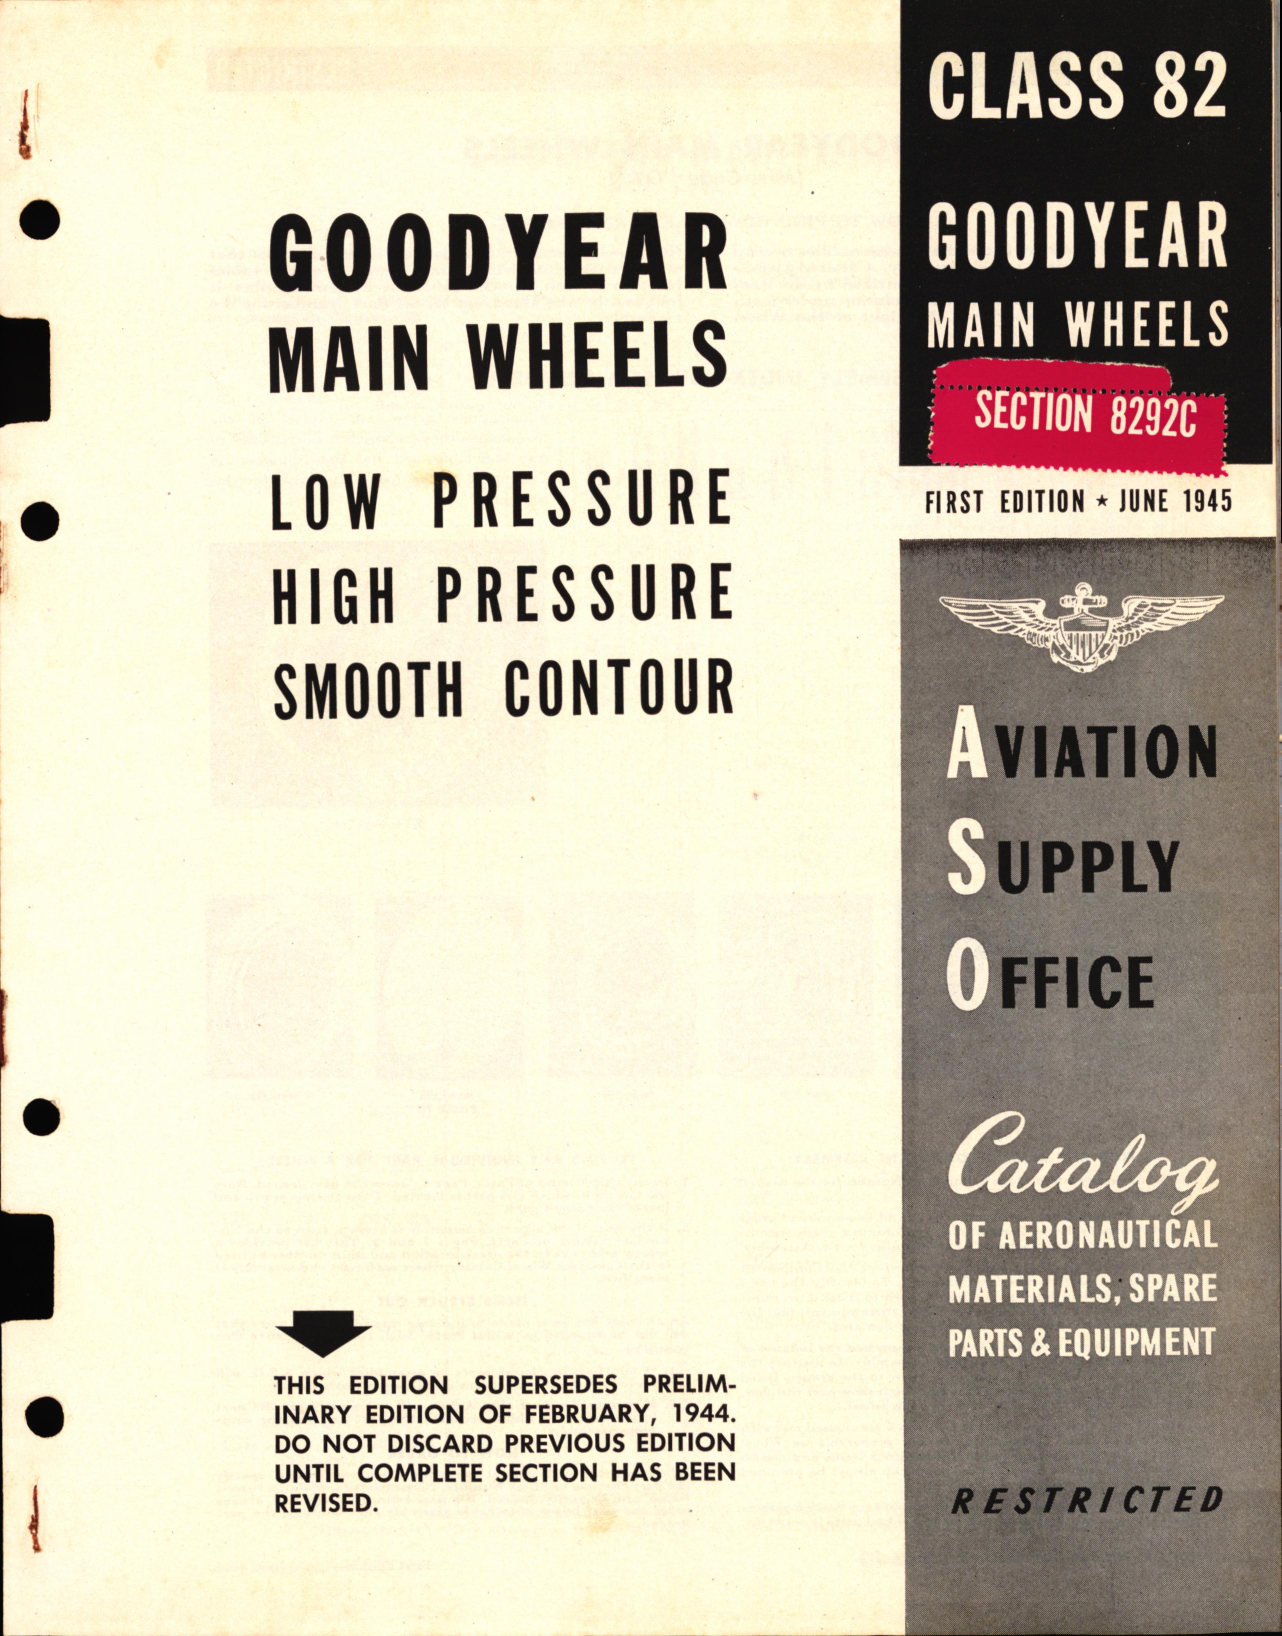 Sample page 1 from AirCorps Library document: Goodyear Main wheels, Low Pressure, High Pressure, Smooth Contour